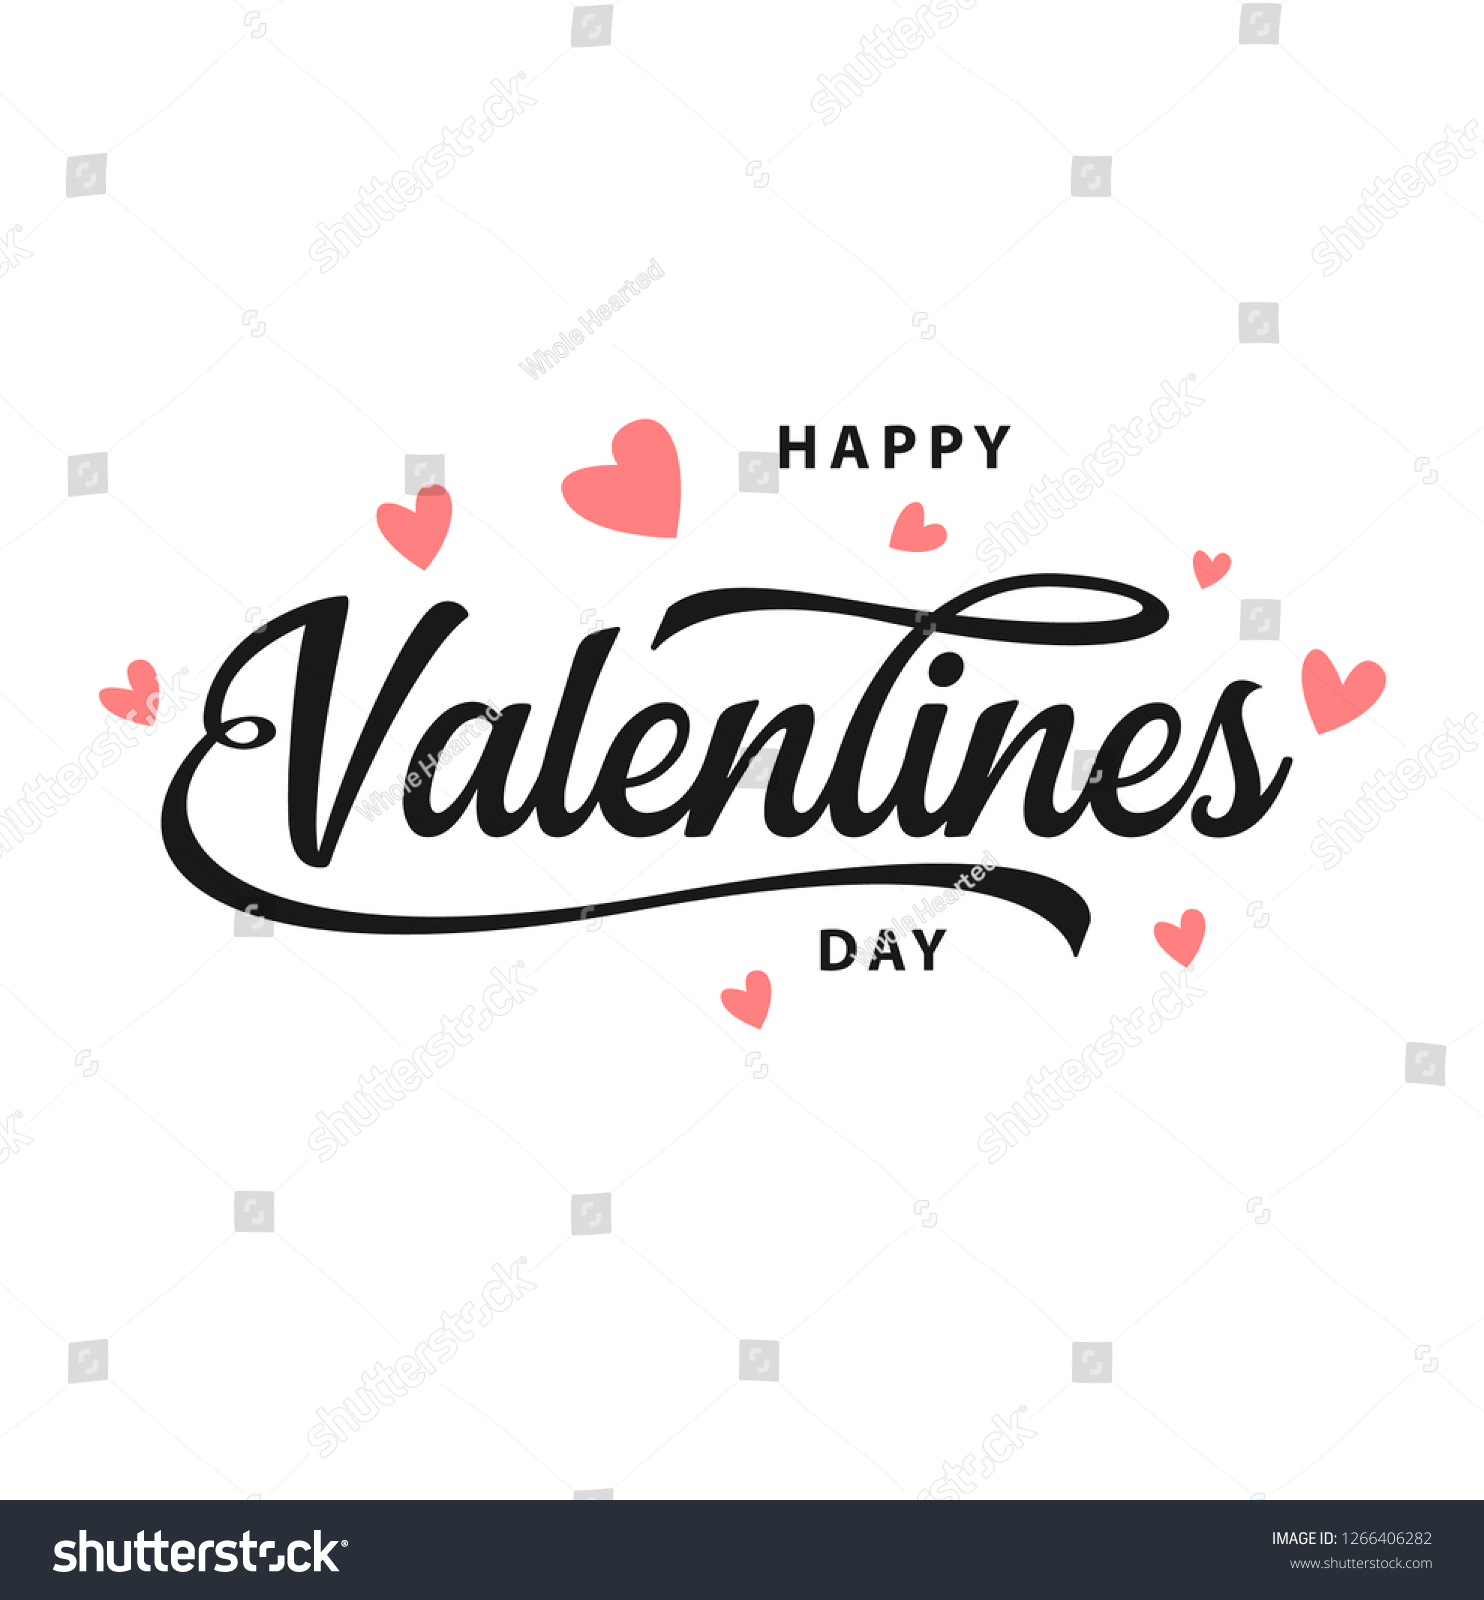 Happy Valentines Day typography poster with handwritten calligraphy text, isolated on white background. Vector Illustration - Vector #1266406282